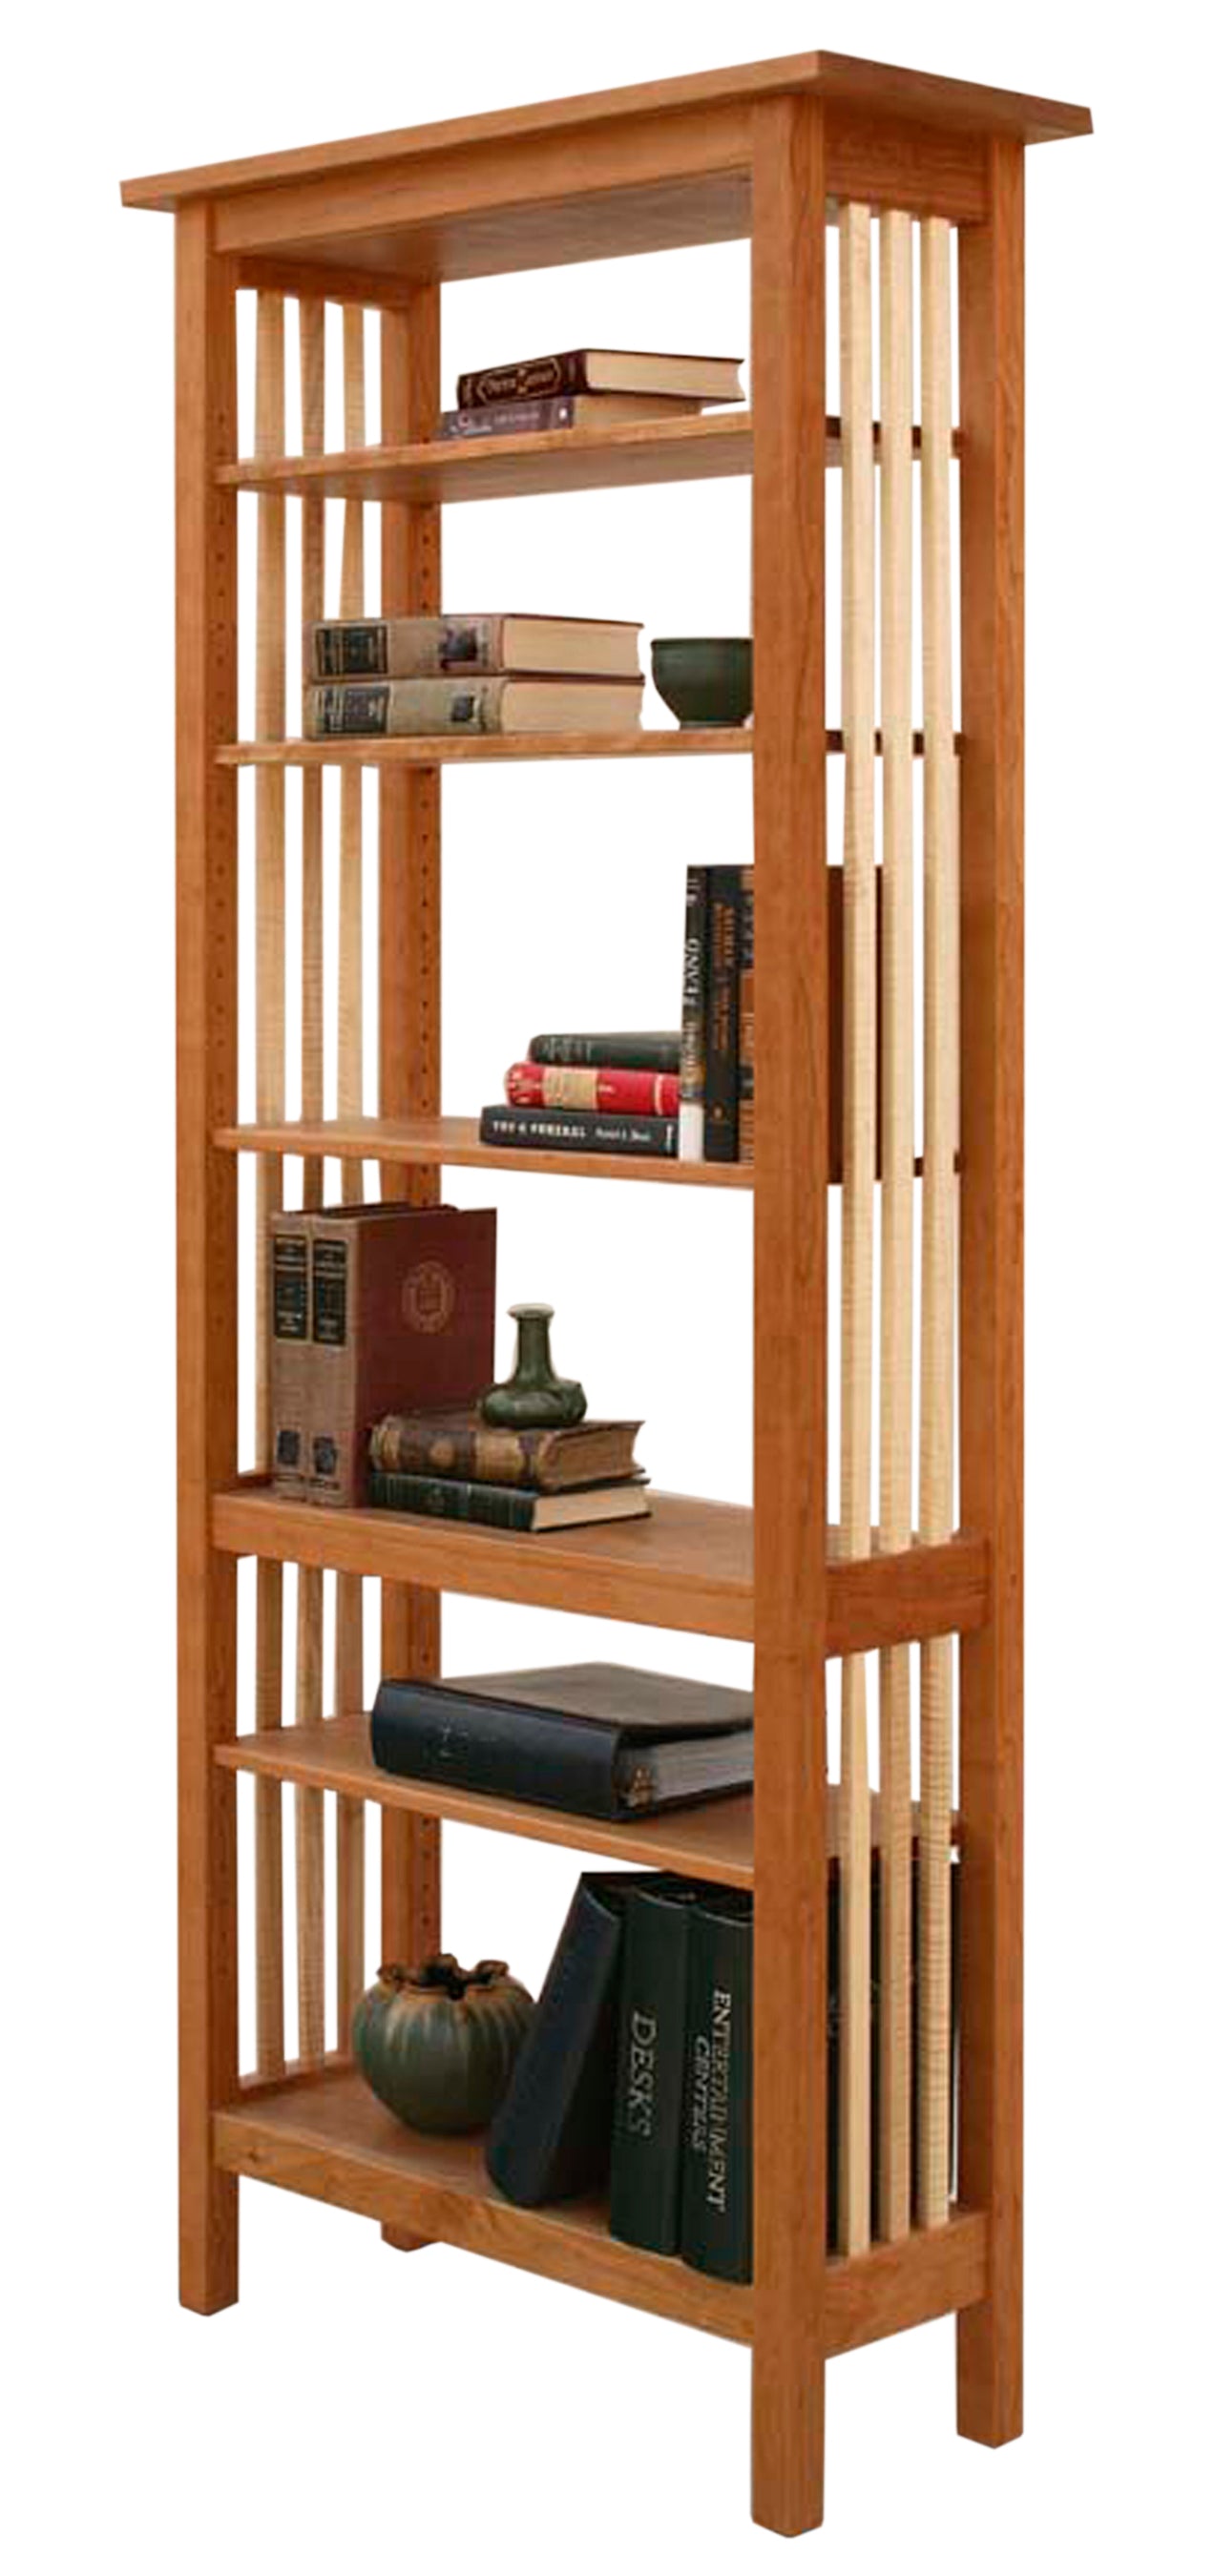 Furniture, Library, Bookstand, Table Top, Adjustable, Mahogany